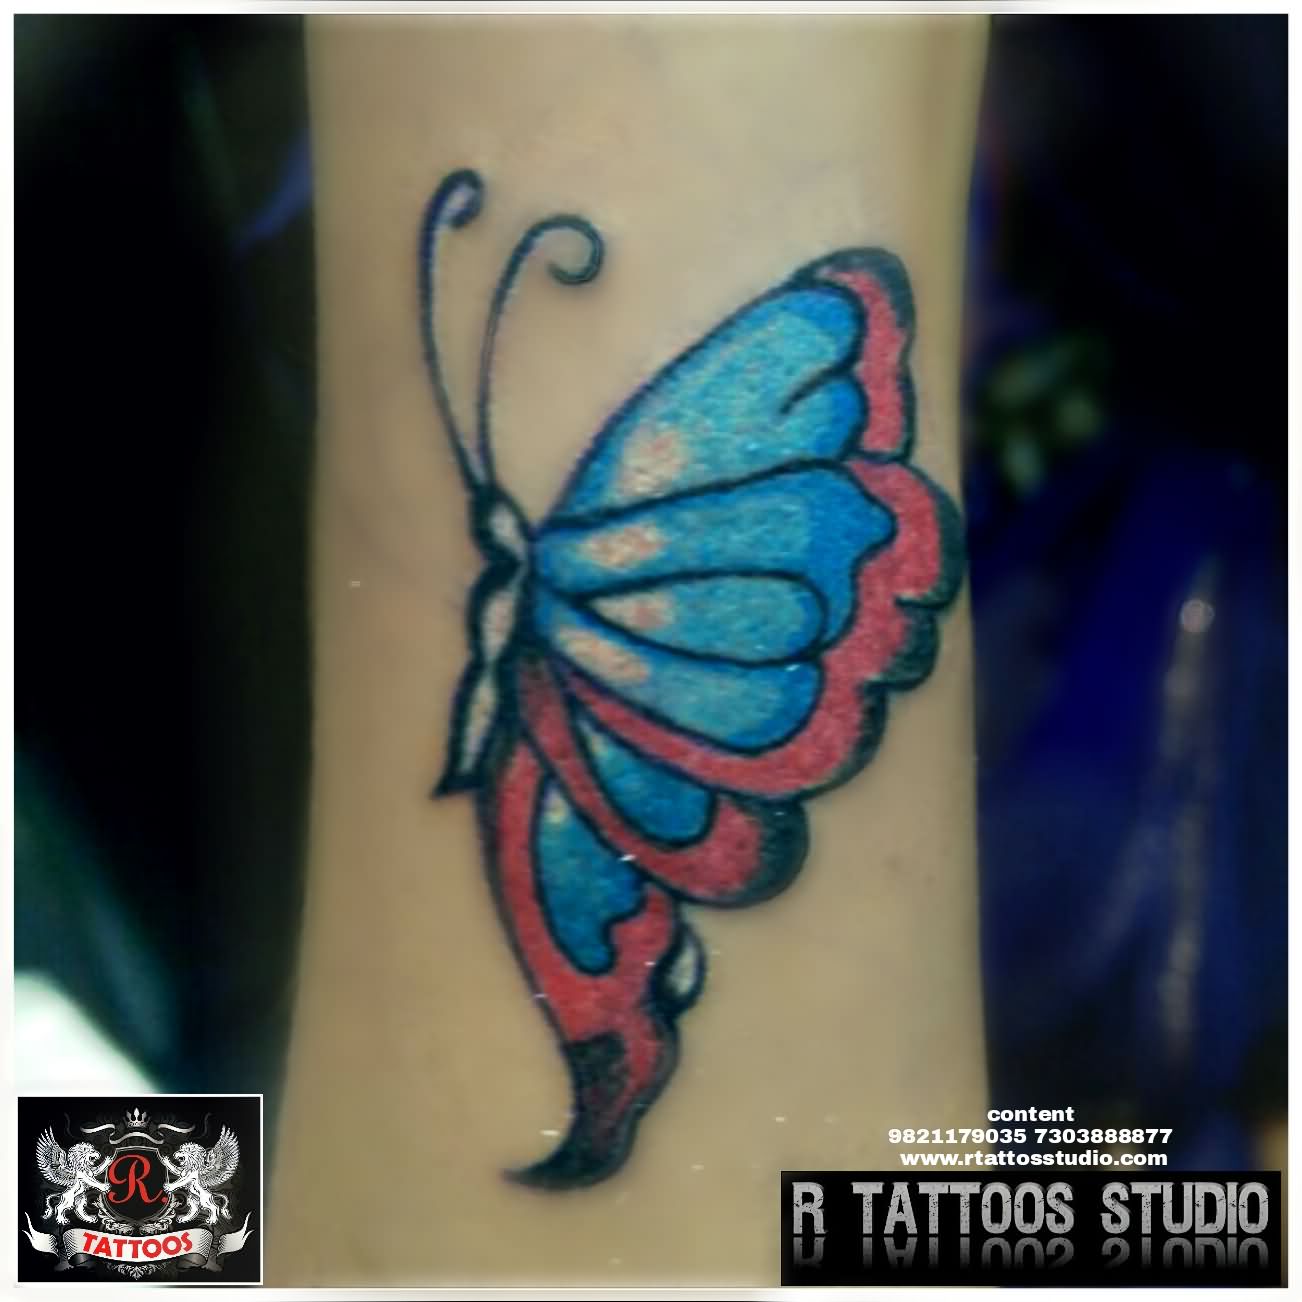 Butterfly Tattoo on Hand